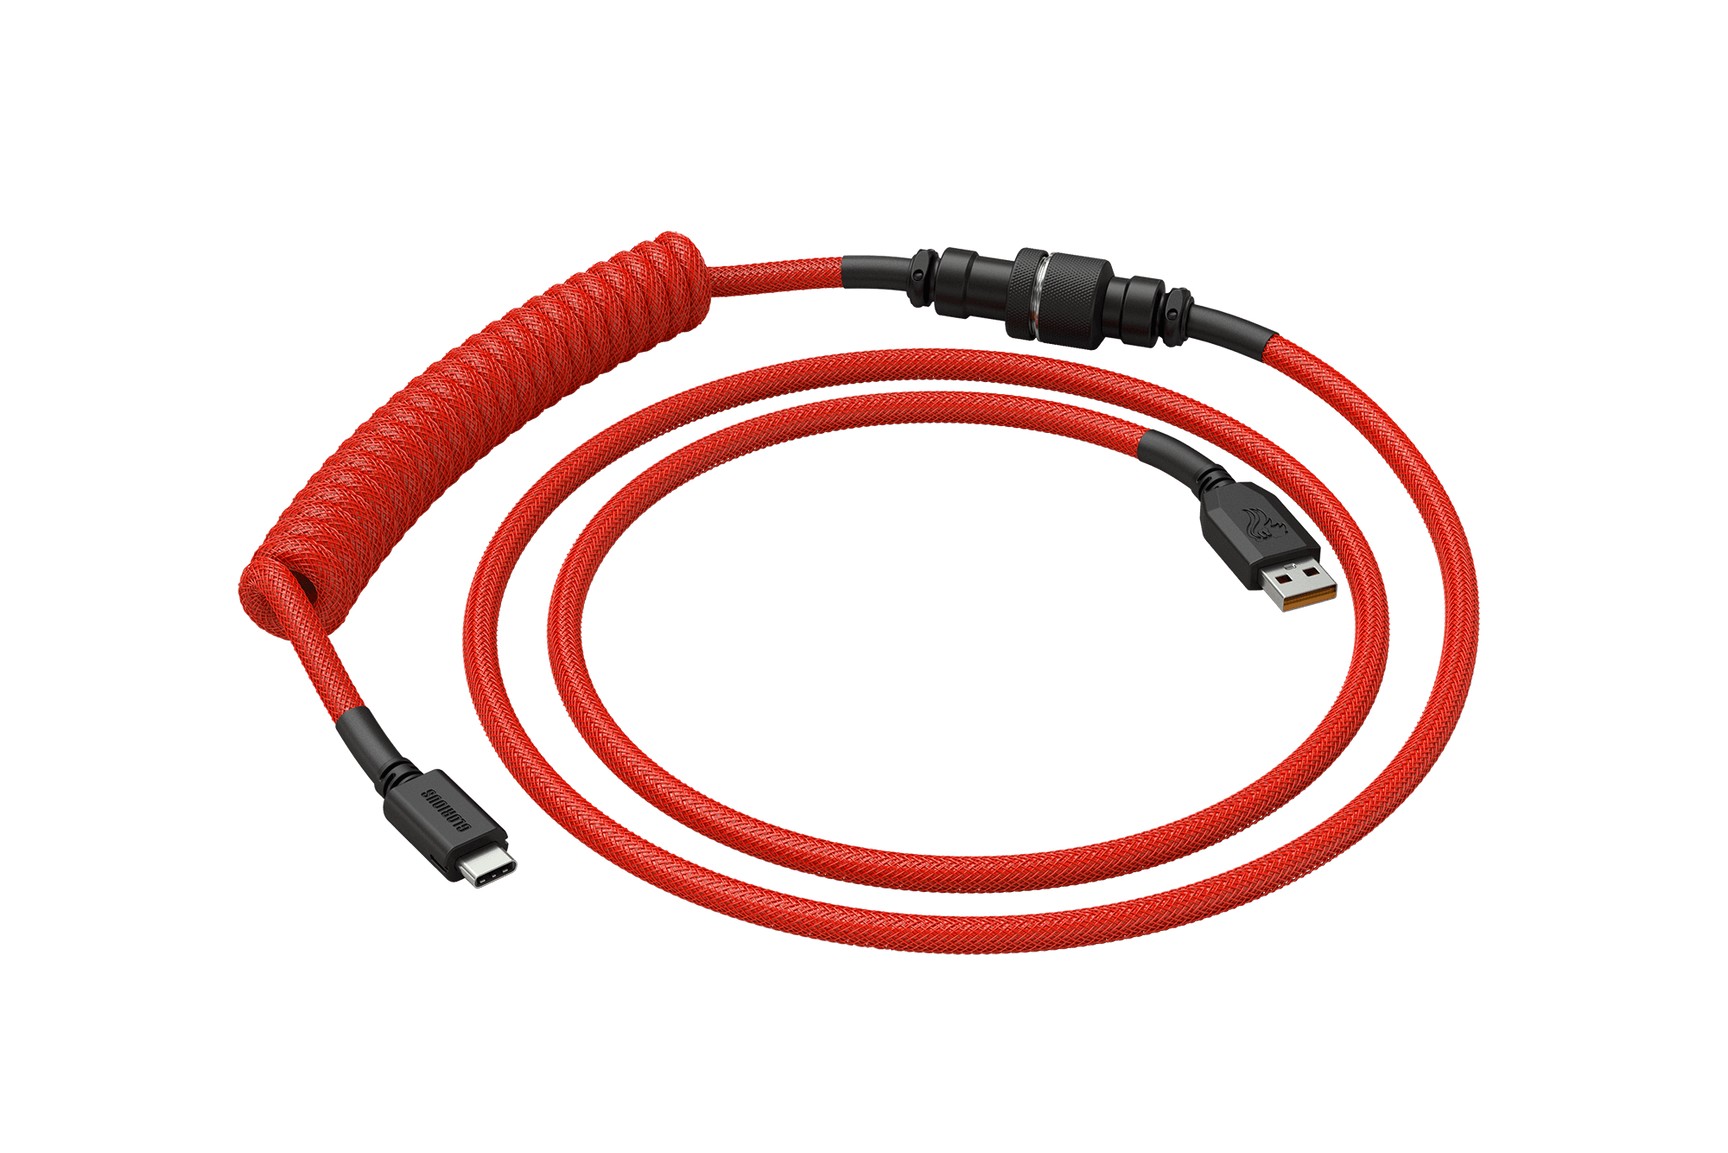 Glorious PC Gaming Race Coiled Cable Crimson Red